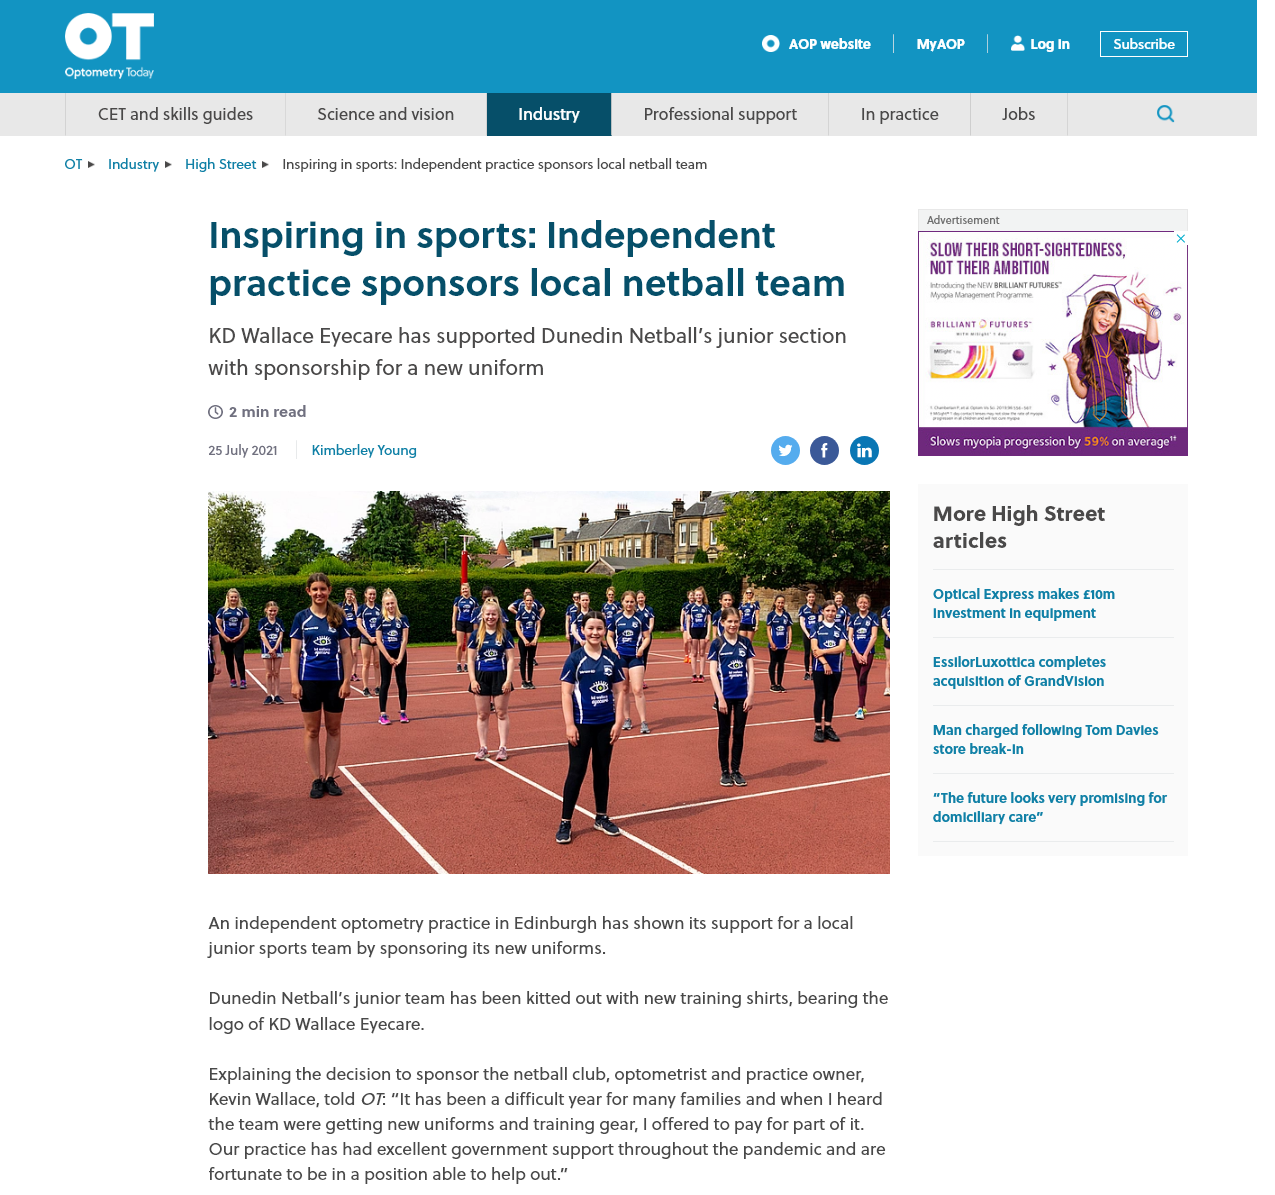 Screenshot 2021-07-28 at 10-33-21 Inspiring in sports Independent practice sponsors local netball team .png